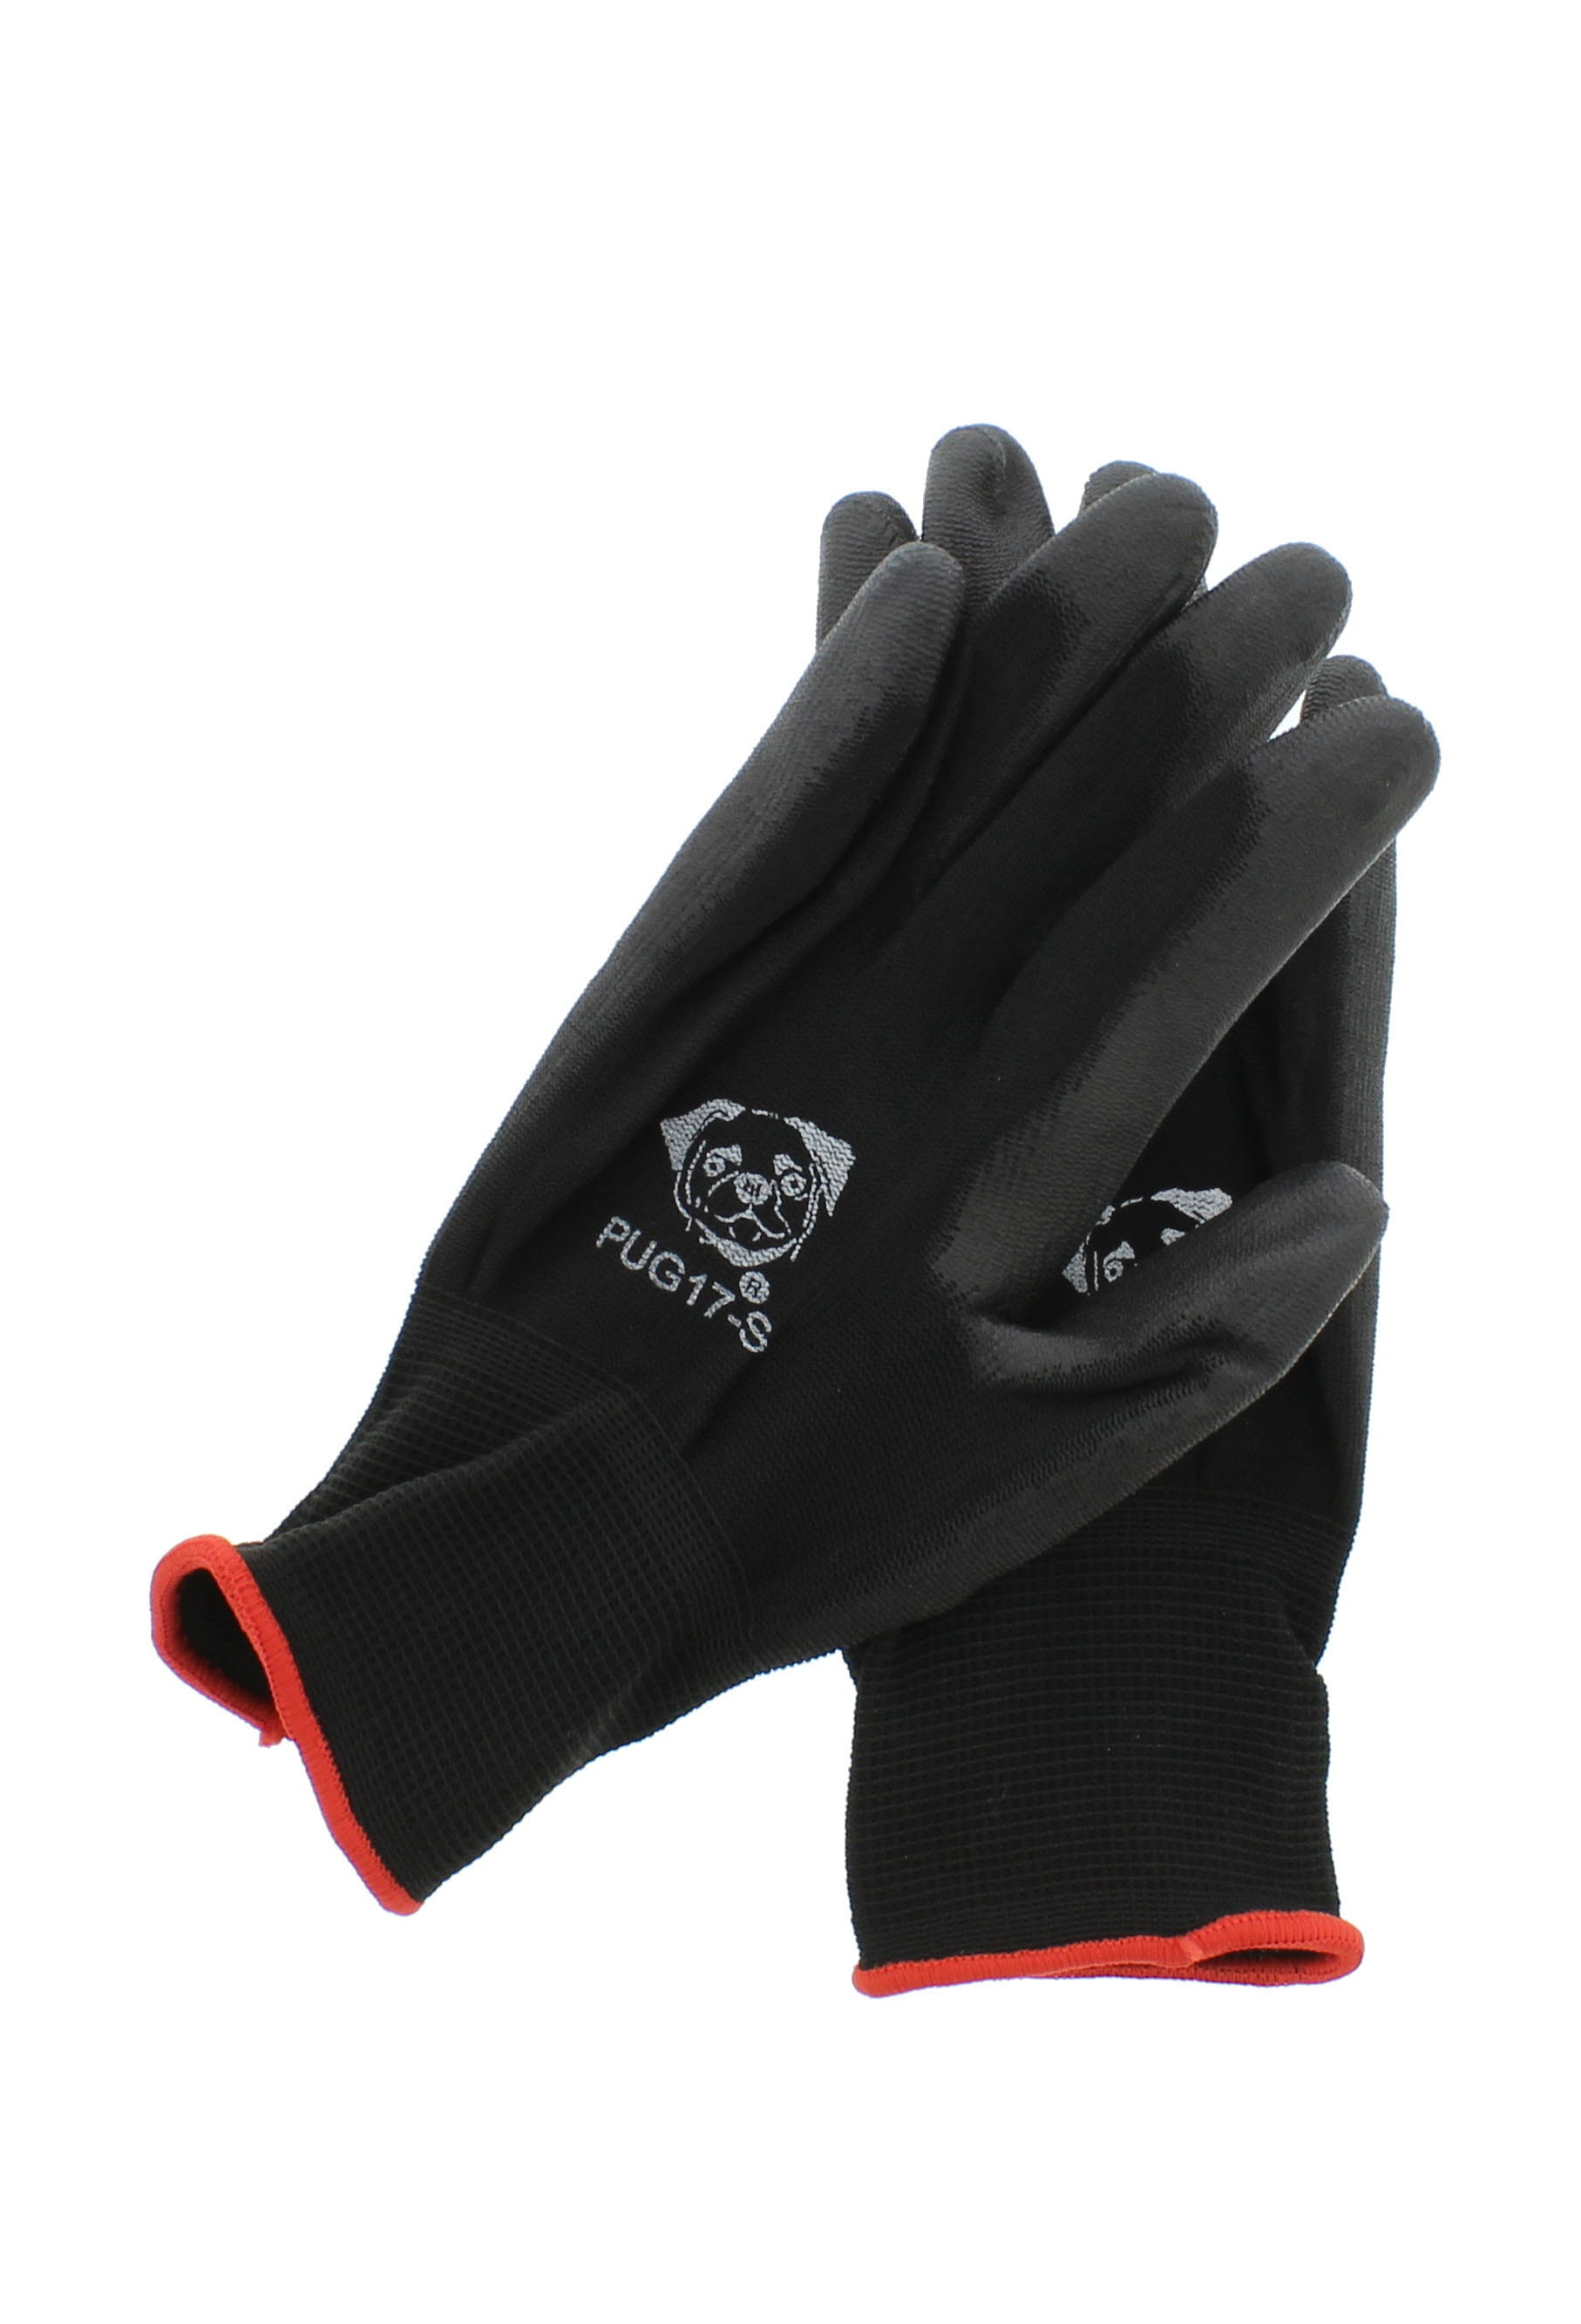 12 pairs of Be-Safe Black Breathable Health and Safety Work Gloves. 